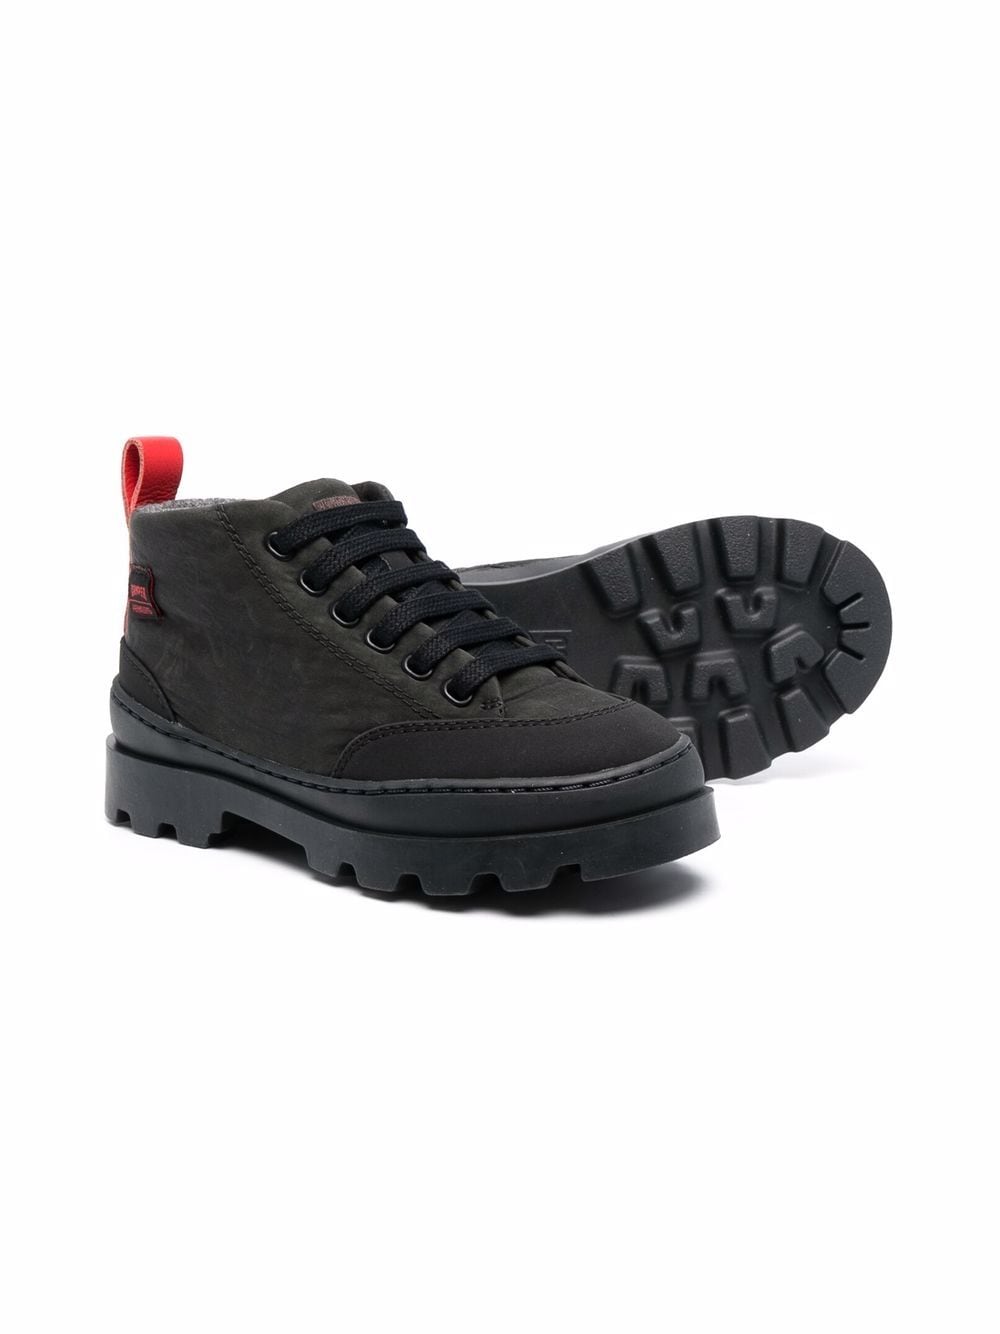 Image 2 of Camper Kids Brutus lace-up boots